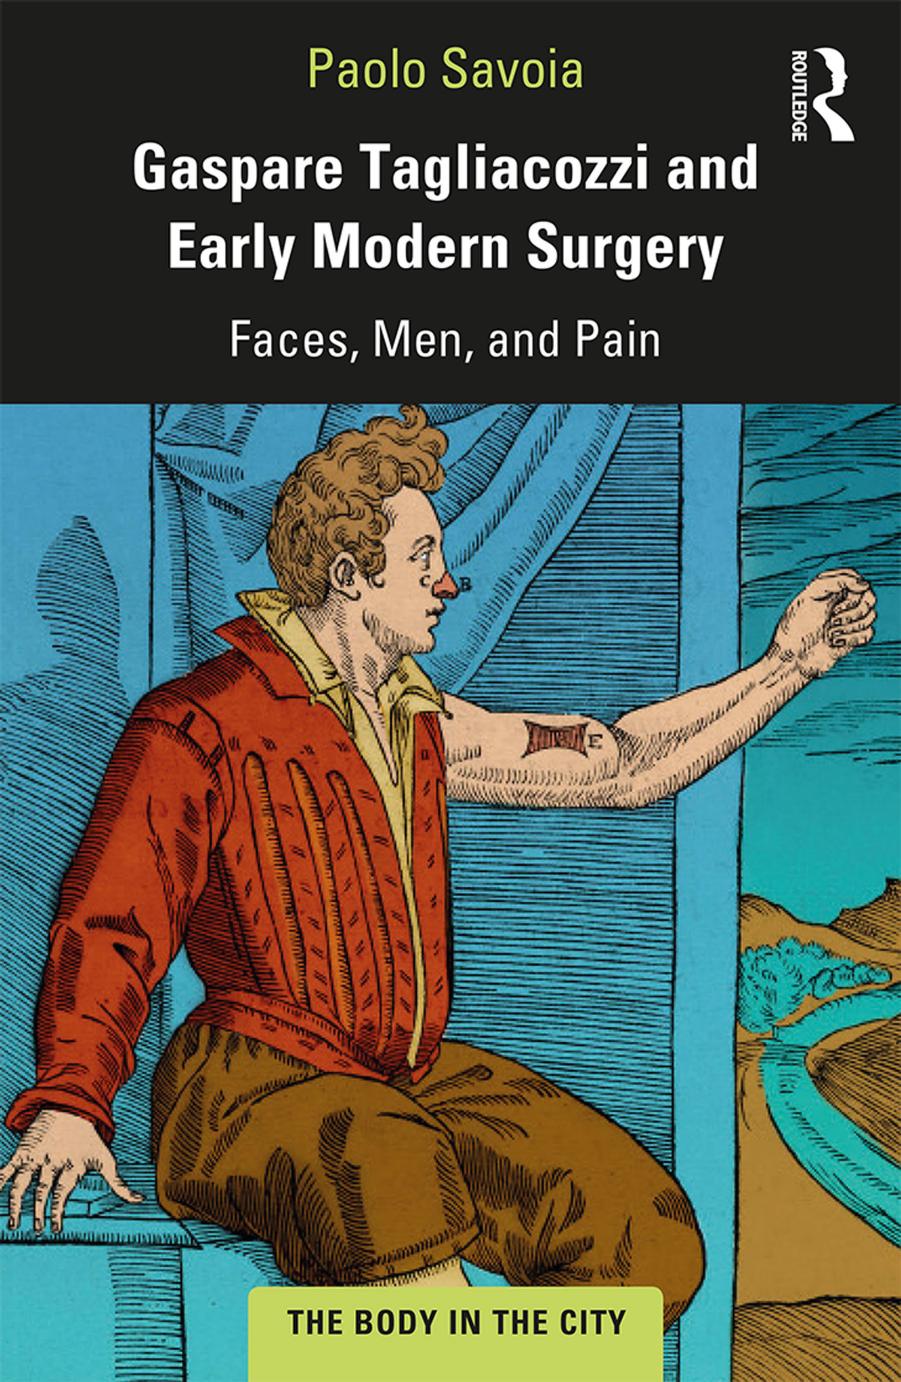 Gaspare Tagliacozzi and early modern surgery : faces, men, and pain